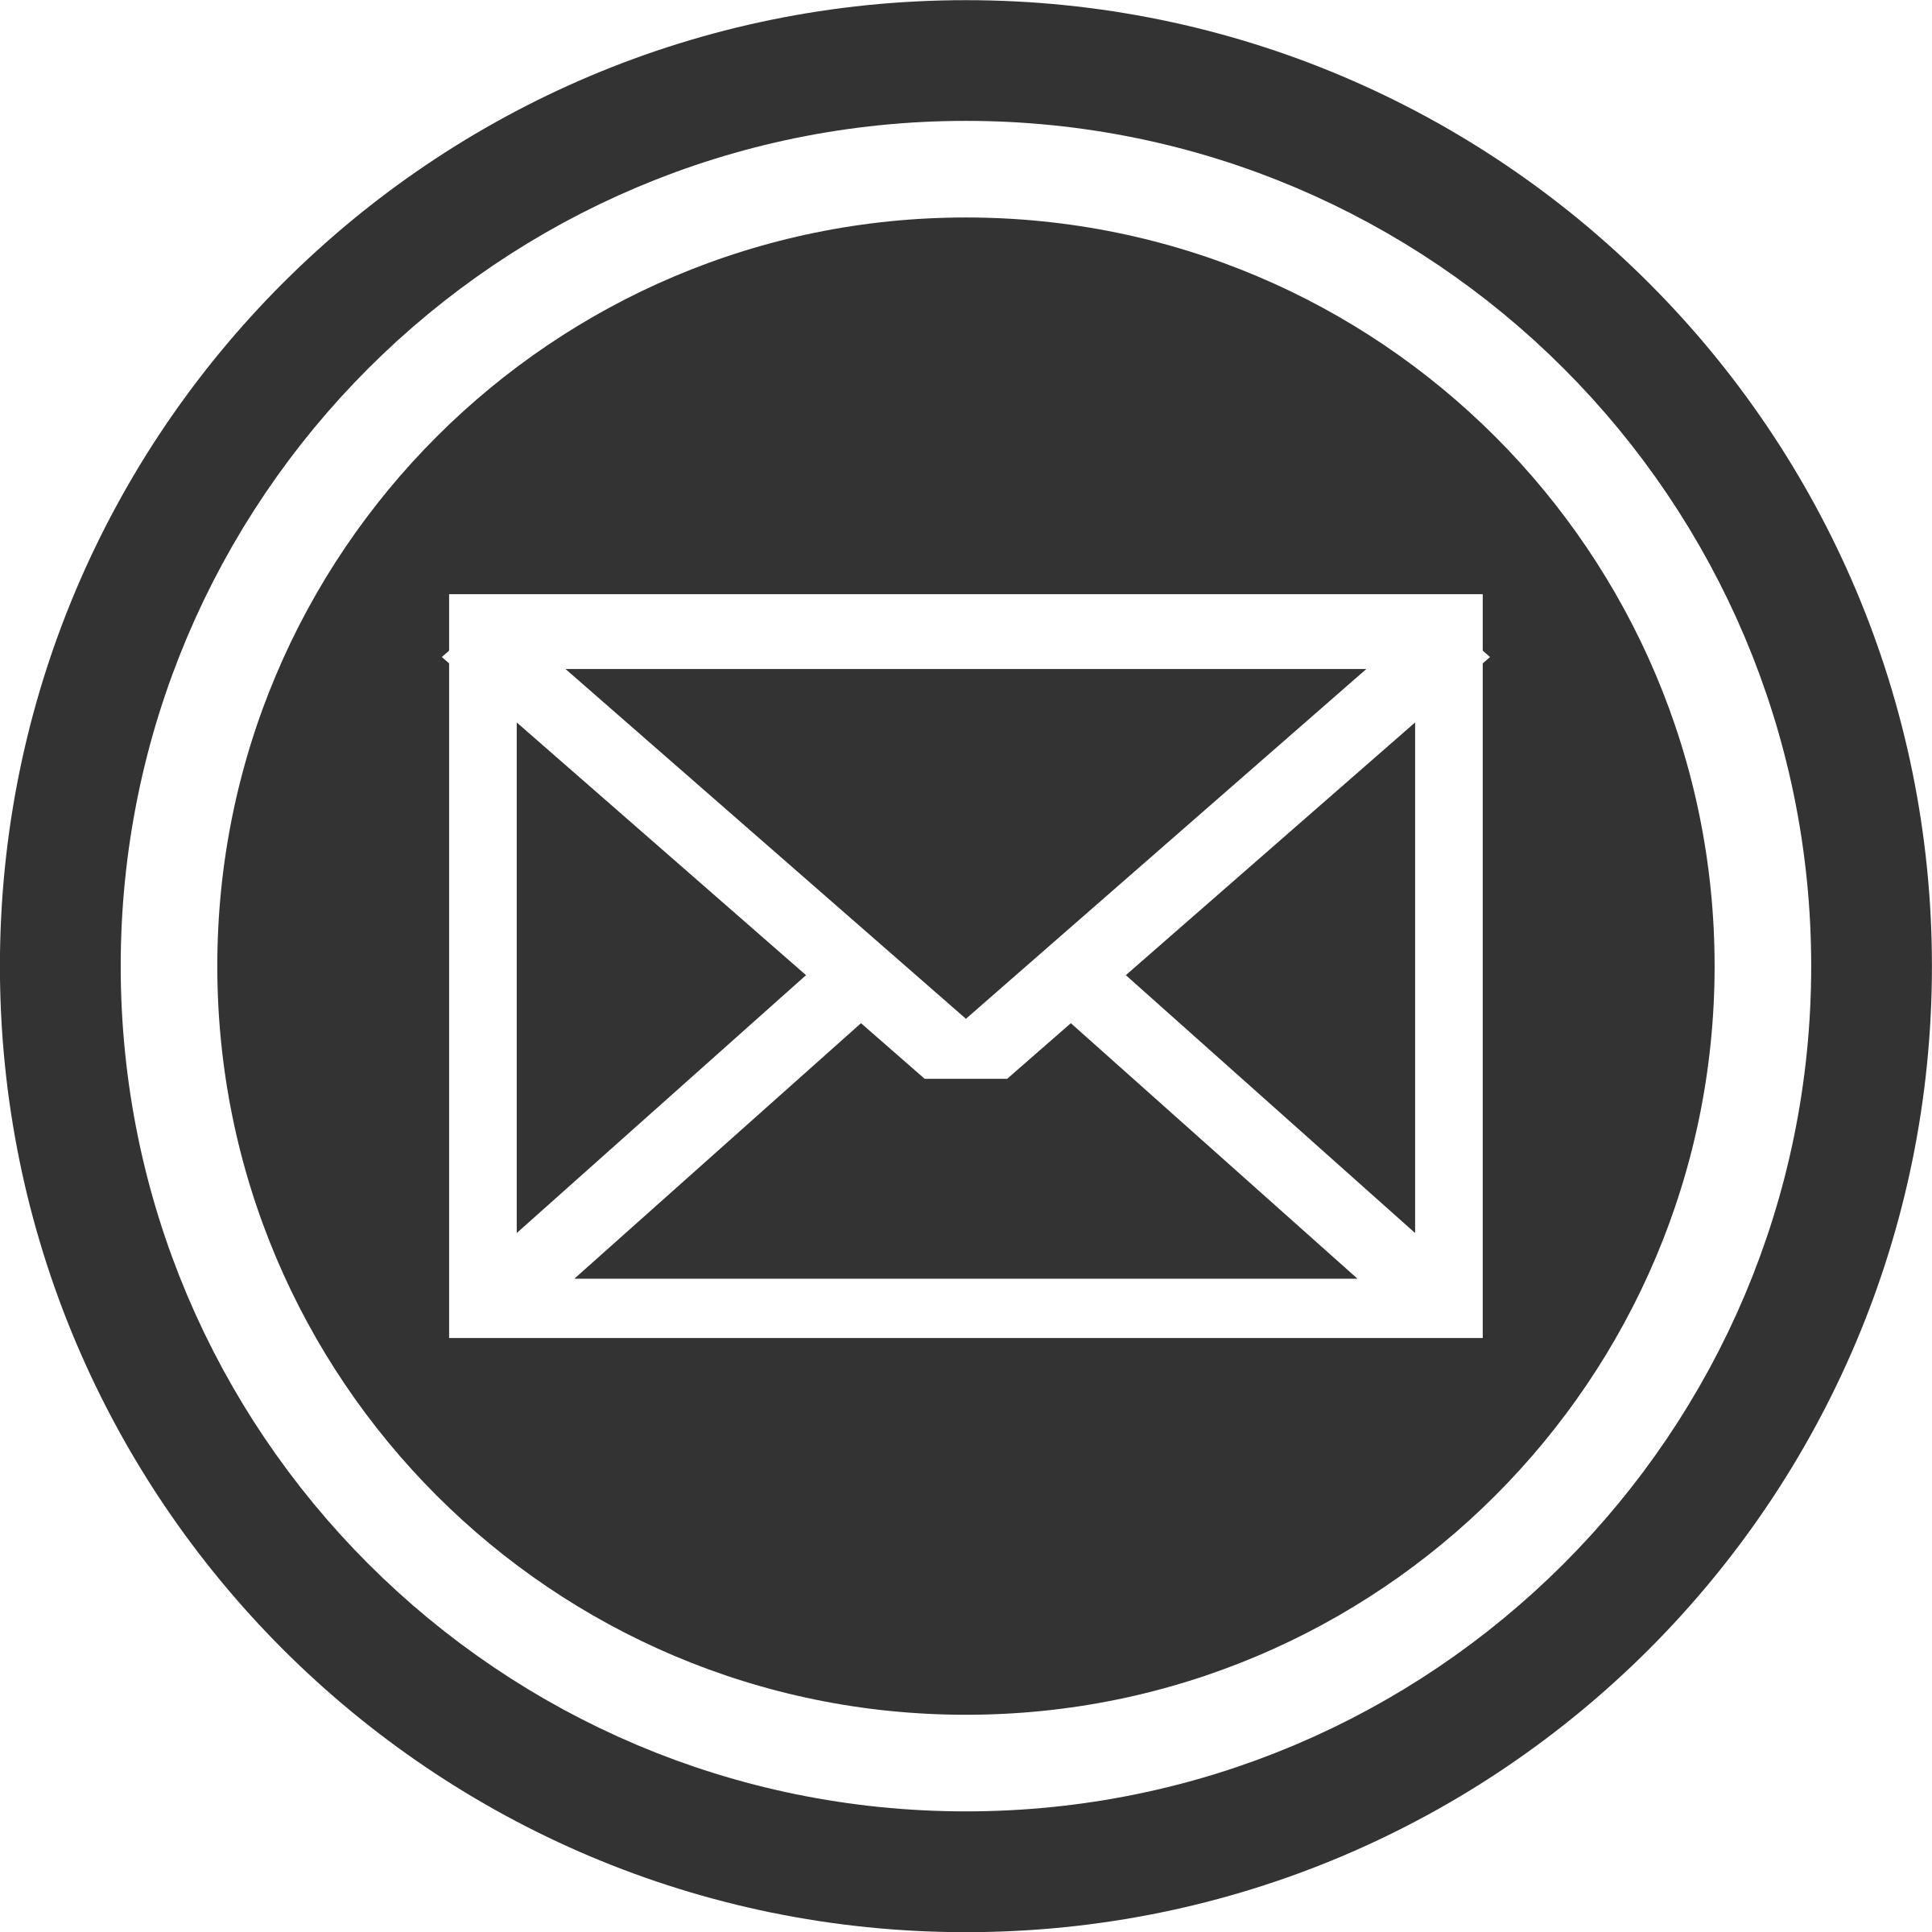 Black and White Mail Logo - Mail Icon on Black Icon PNG PNG and Icon Downloads